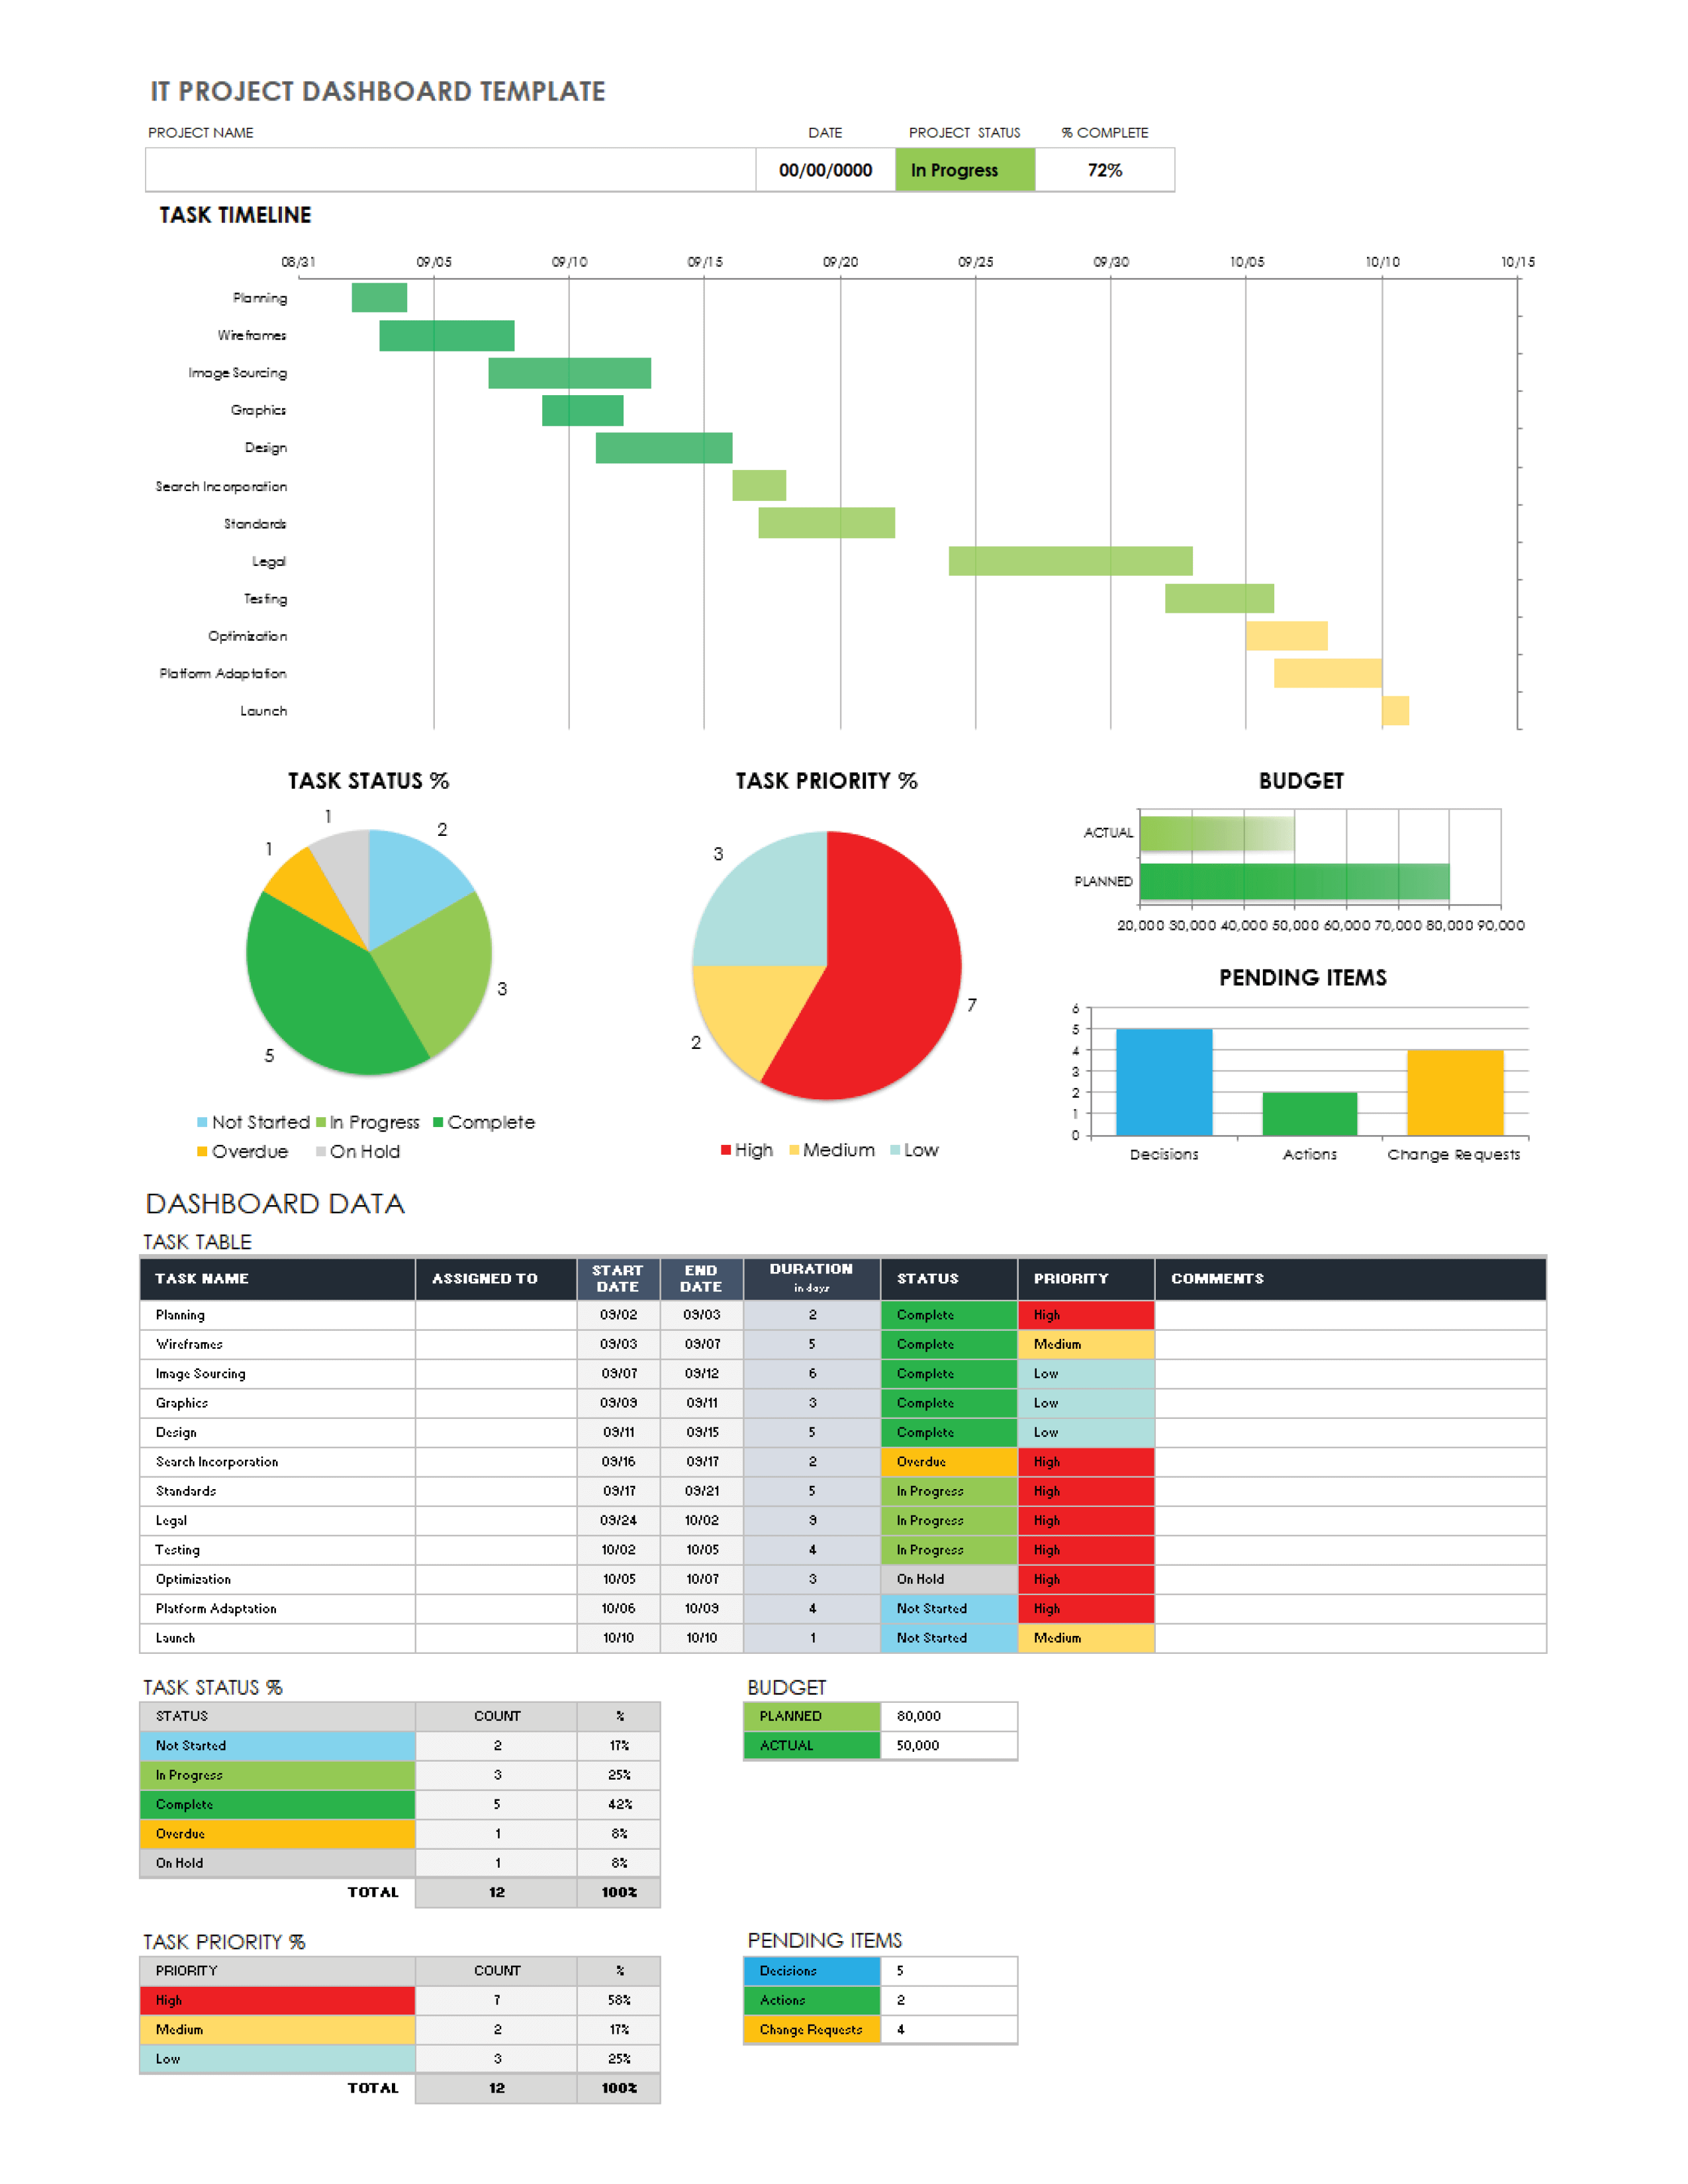 IT Project Dashboard Template